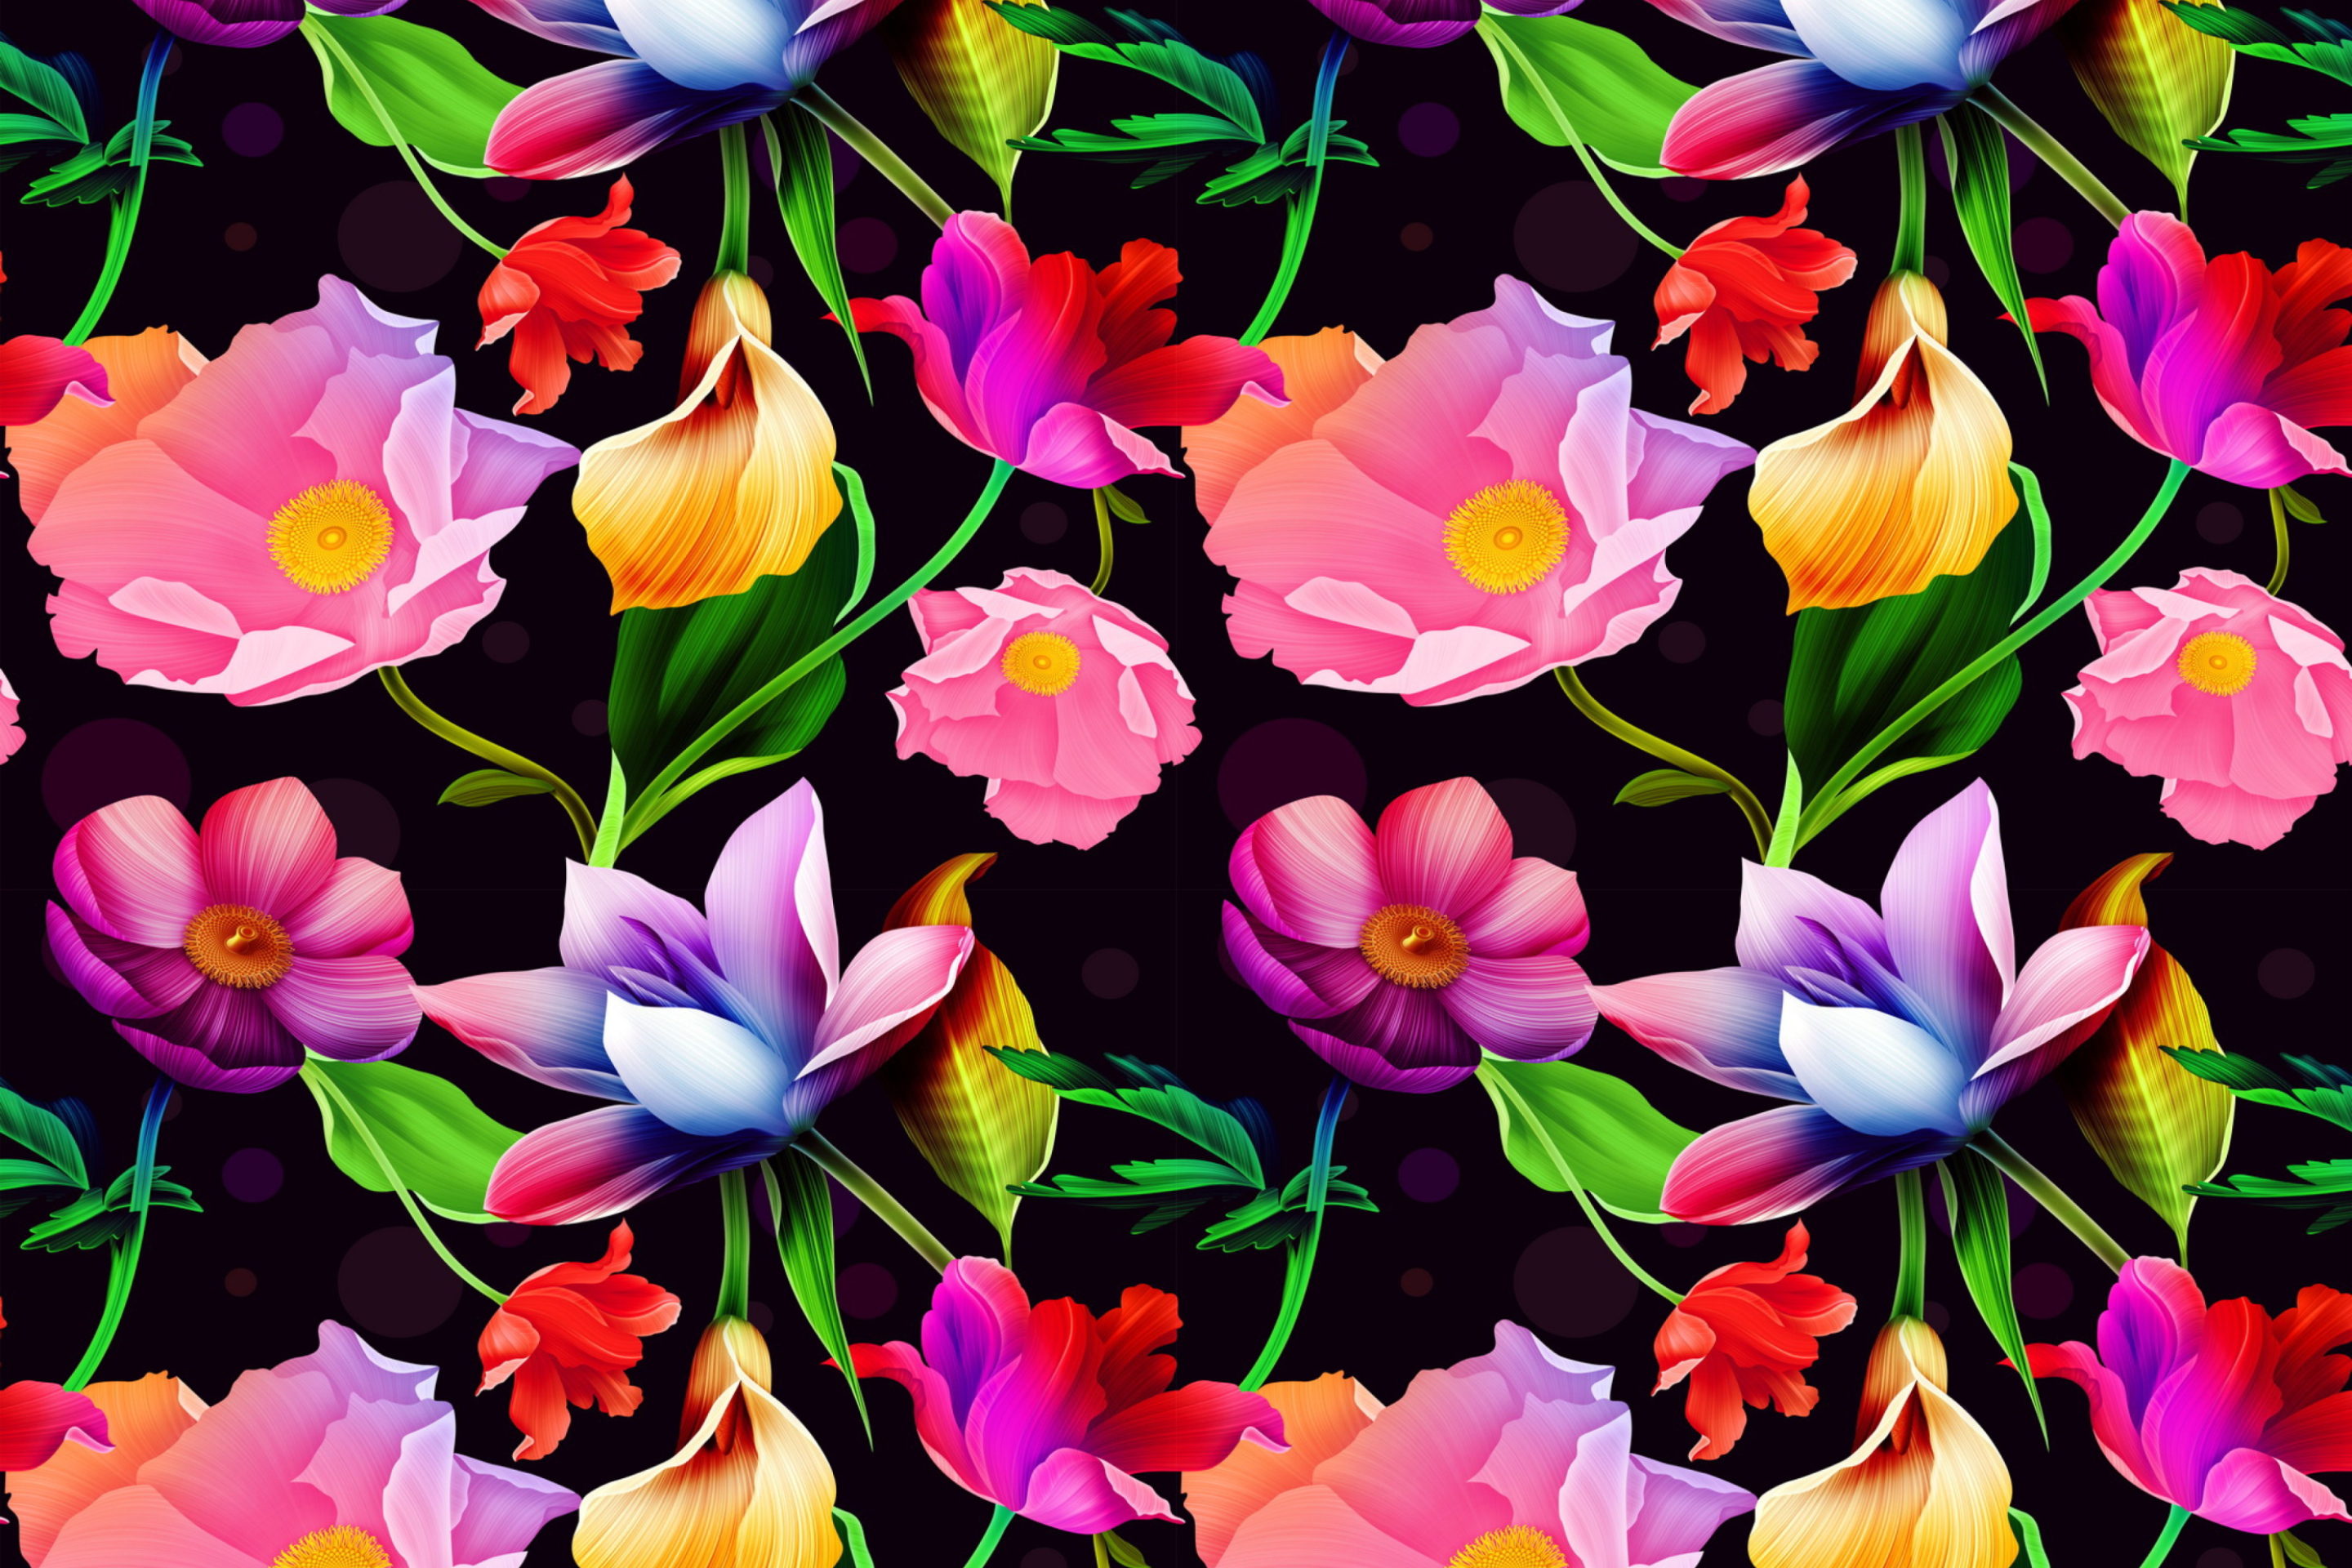 Colorful Flowers wallpaper 2880x1920